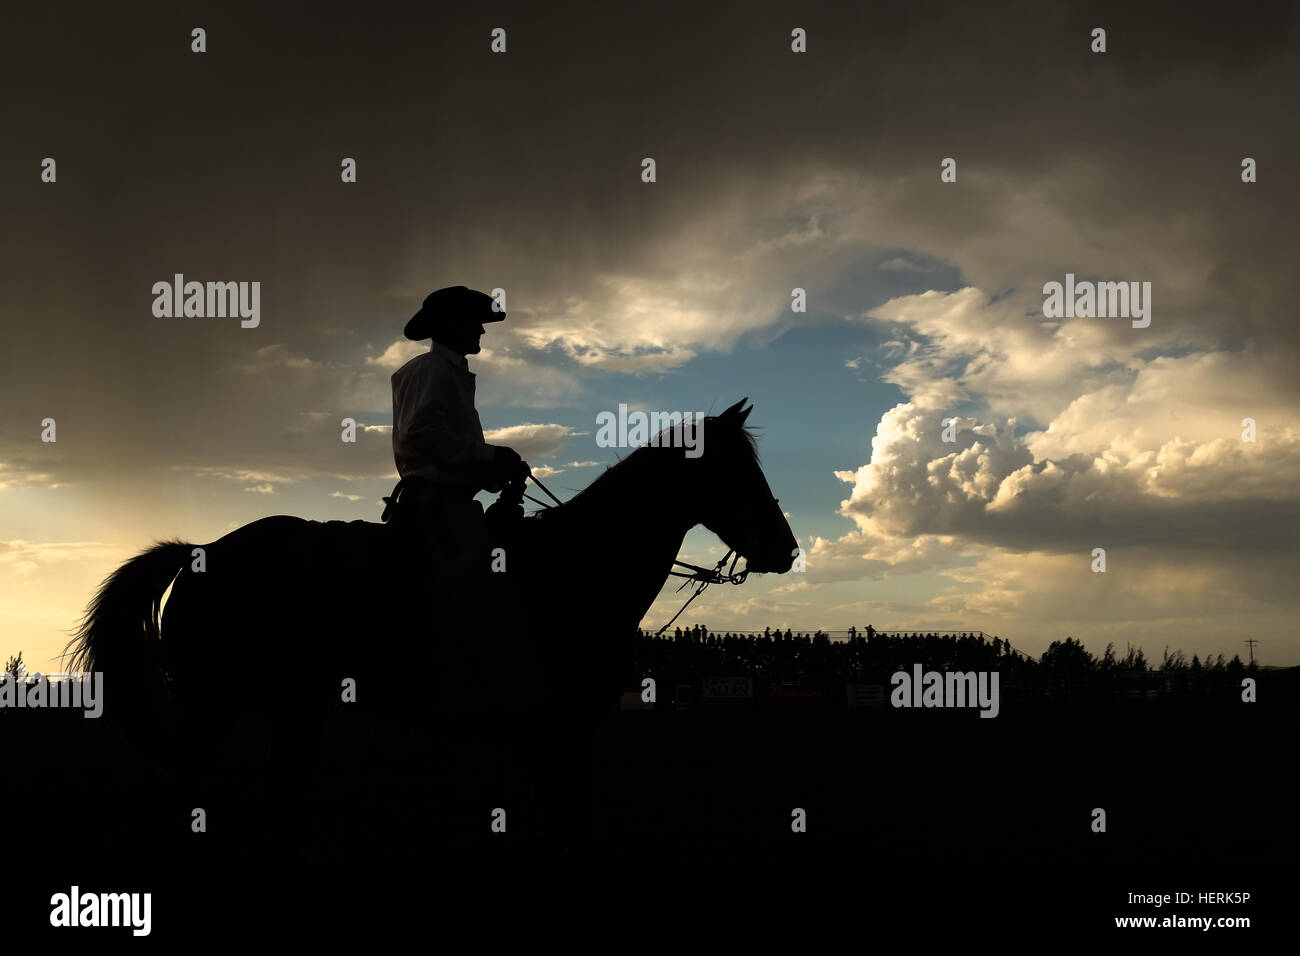 Silhouette of a cowboy on a horse, Wyoming, United States Stock Photo